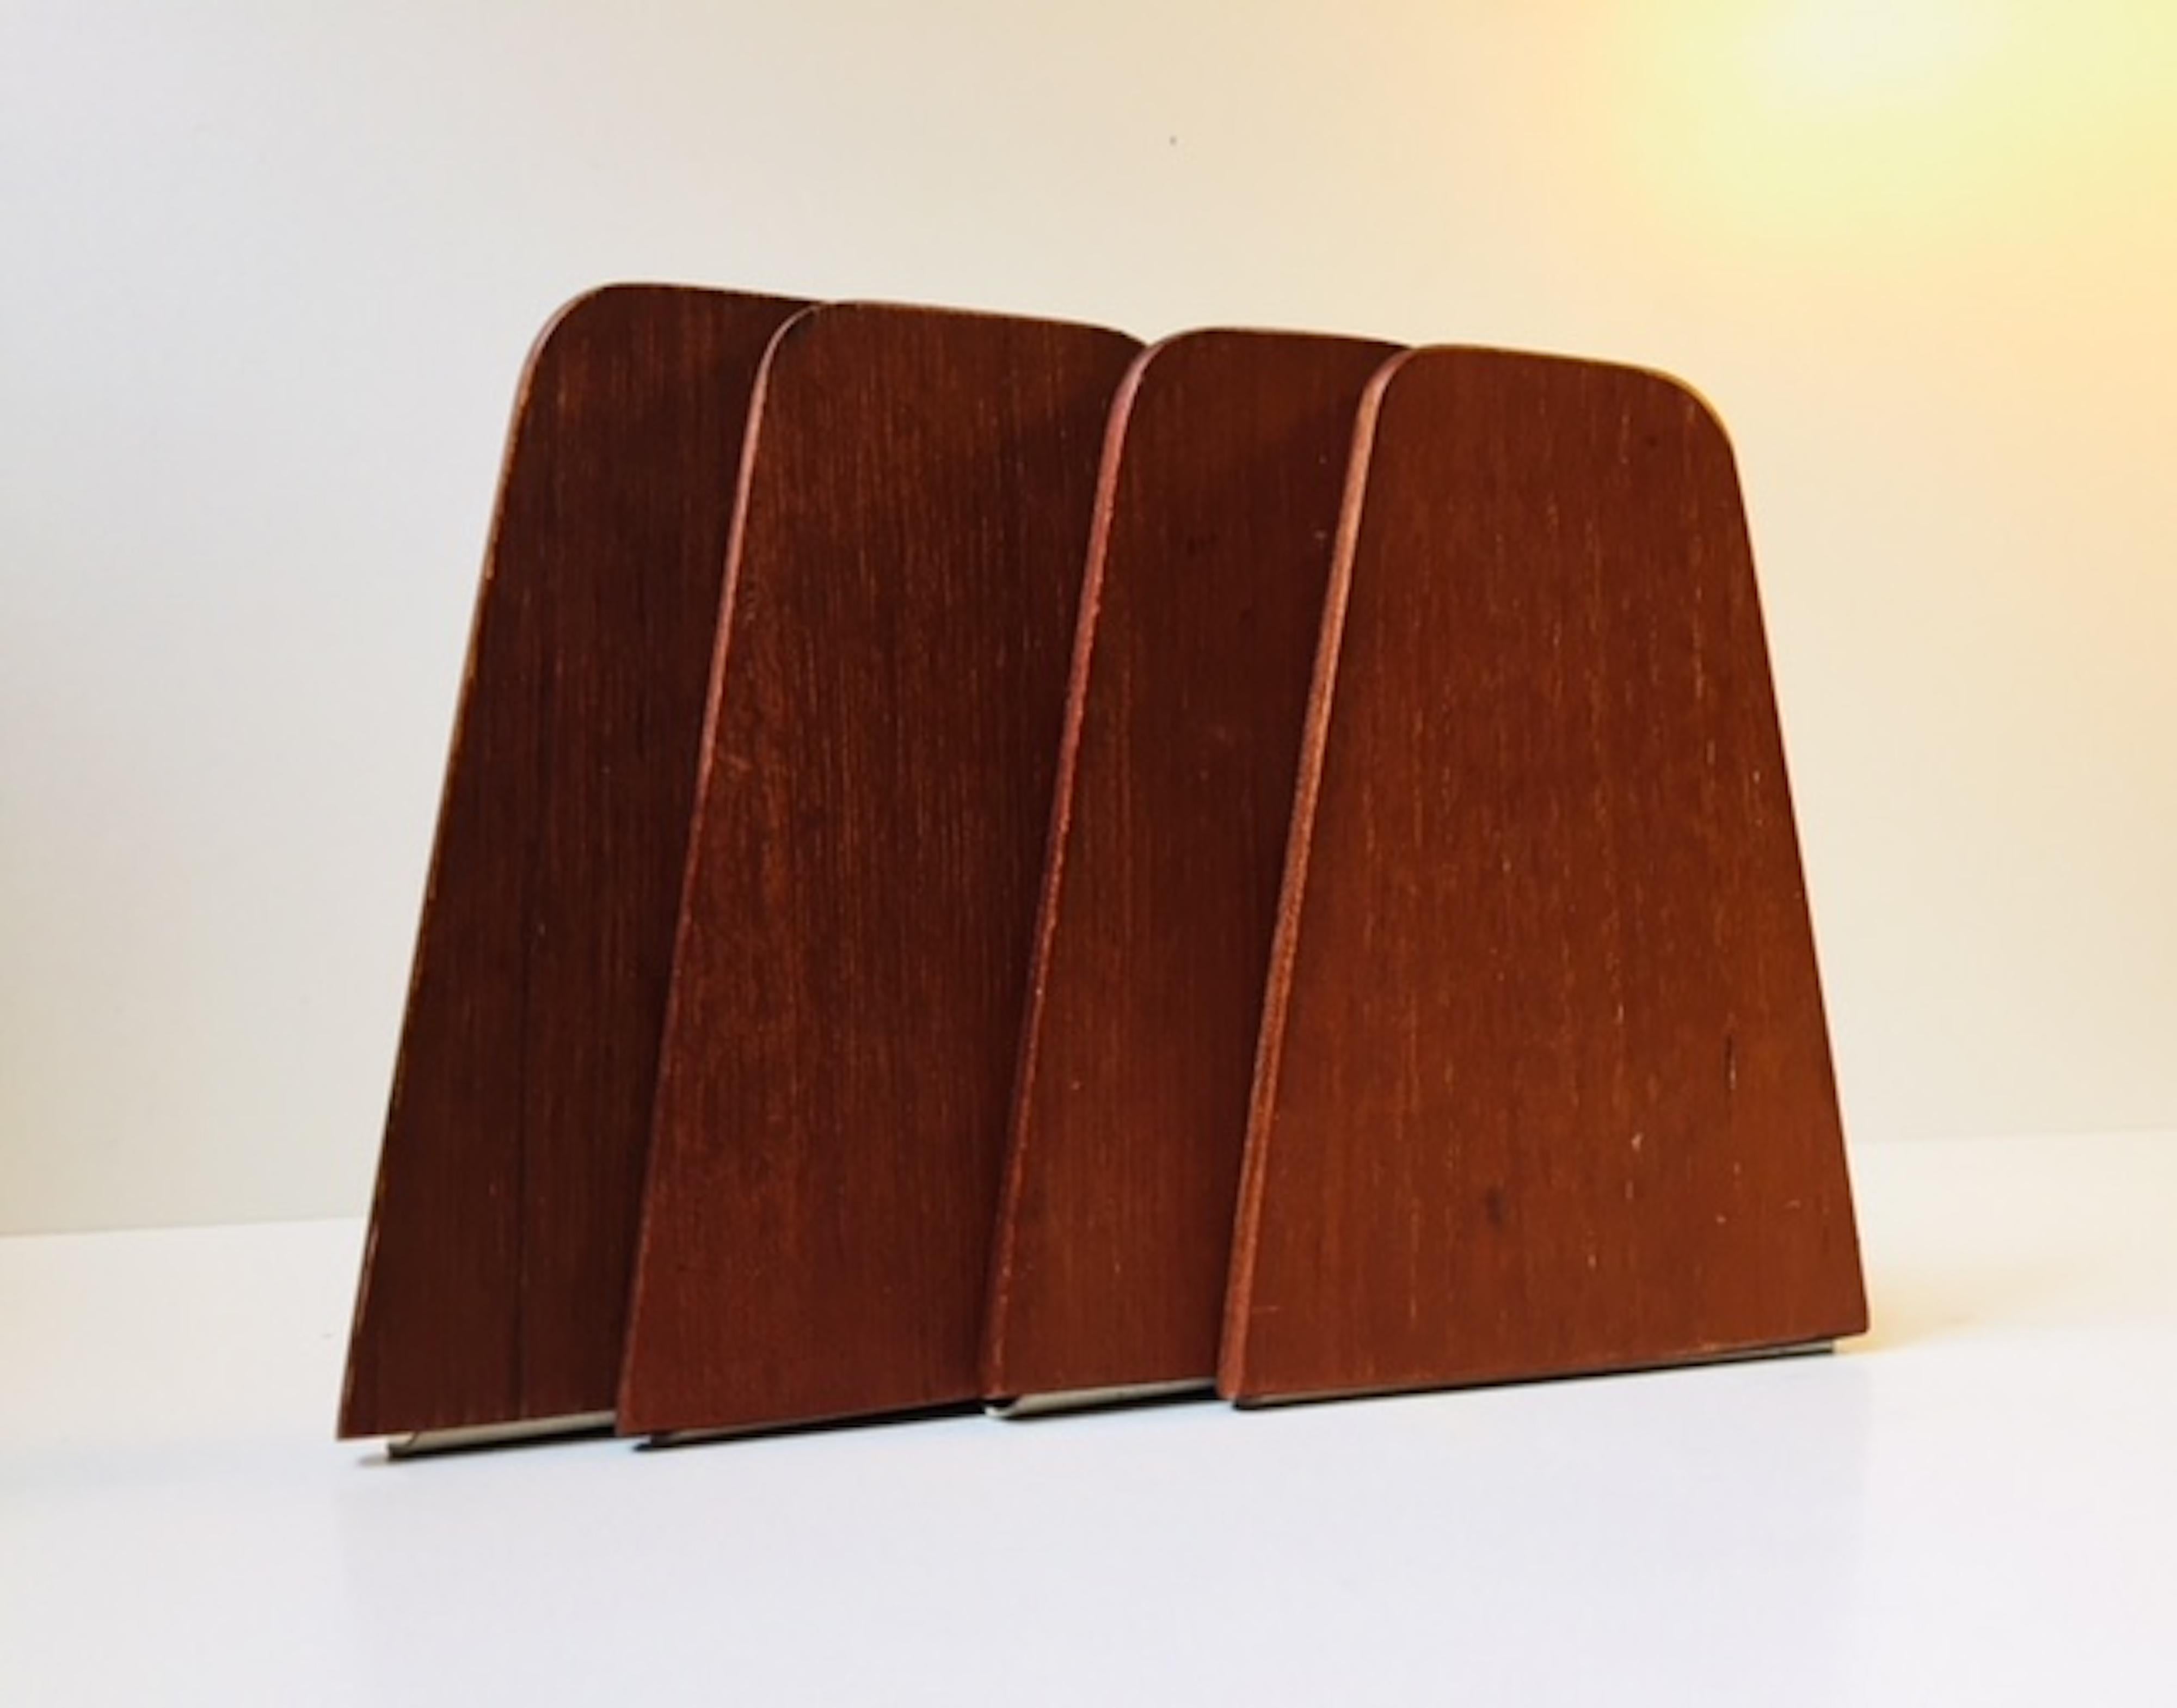 A set of four bookends in teak with steel rests. Designed by Kai Kristiansen and manufactured by FM Møbler in Denmark during the 1960s.